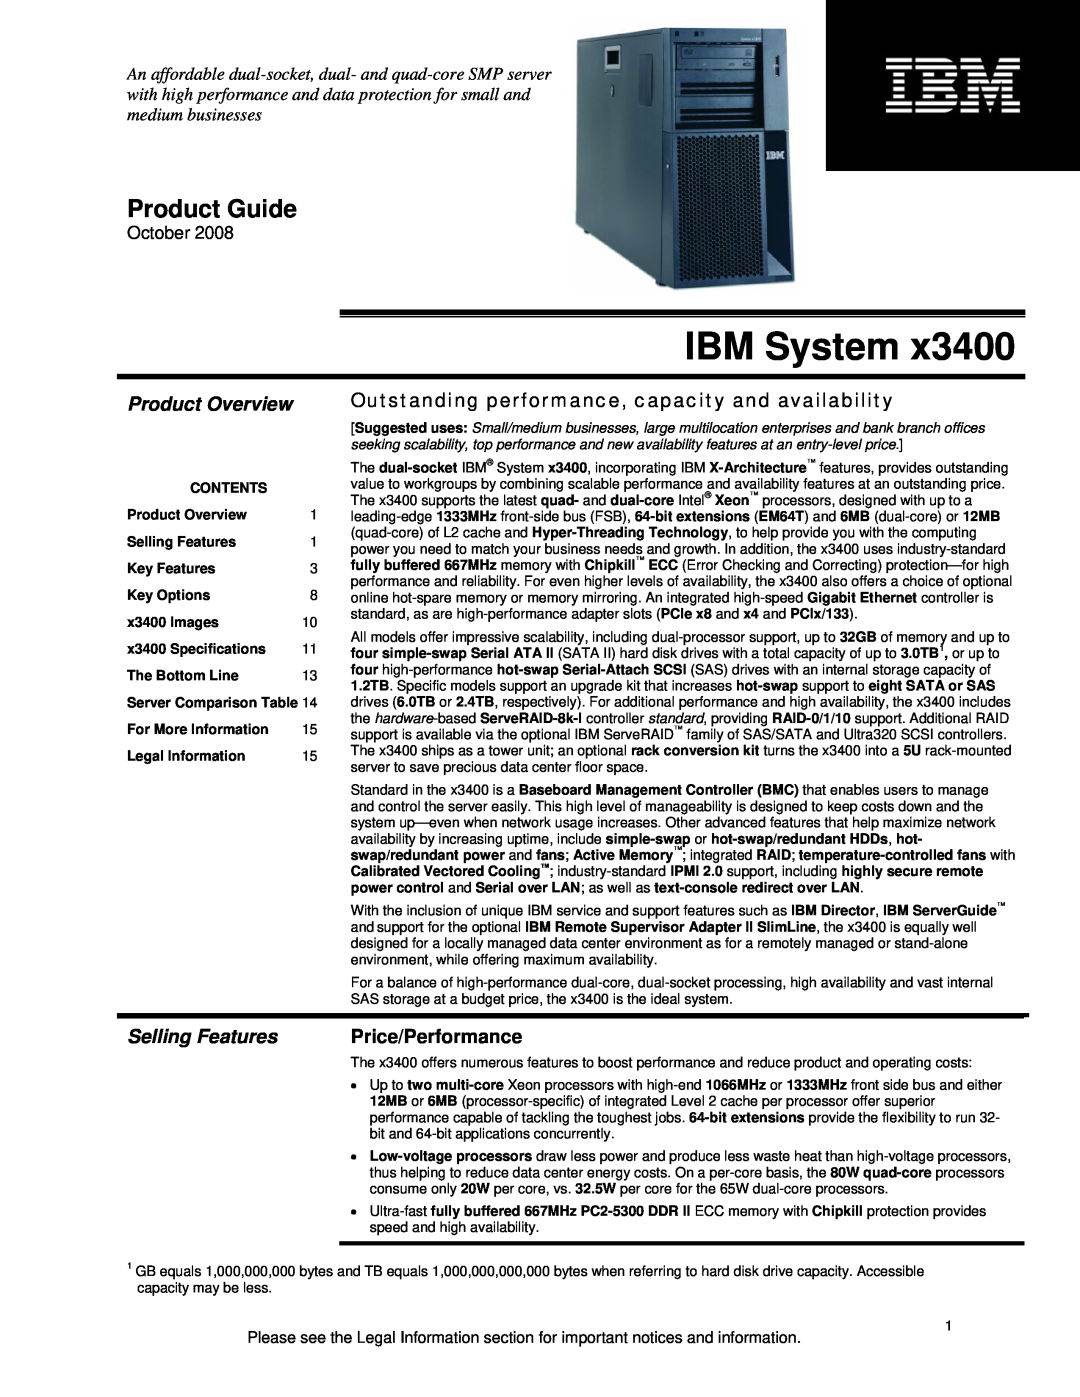 IBM x3400 specifications Product Overview, Selling Features, Price/Performance, December, IBM System, Pocket Guide 